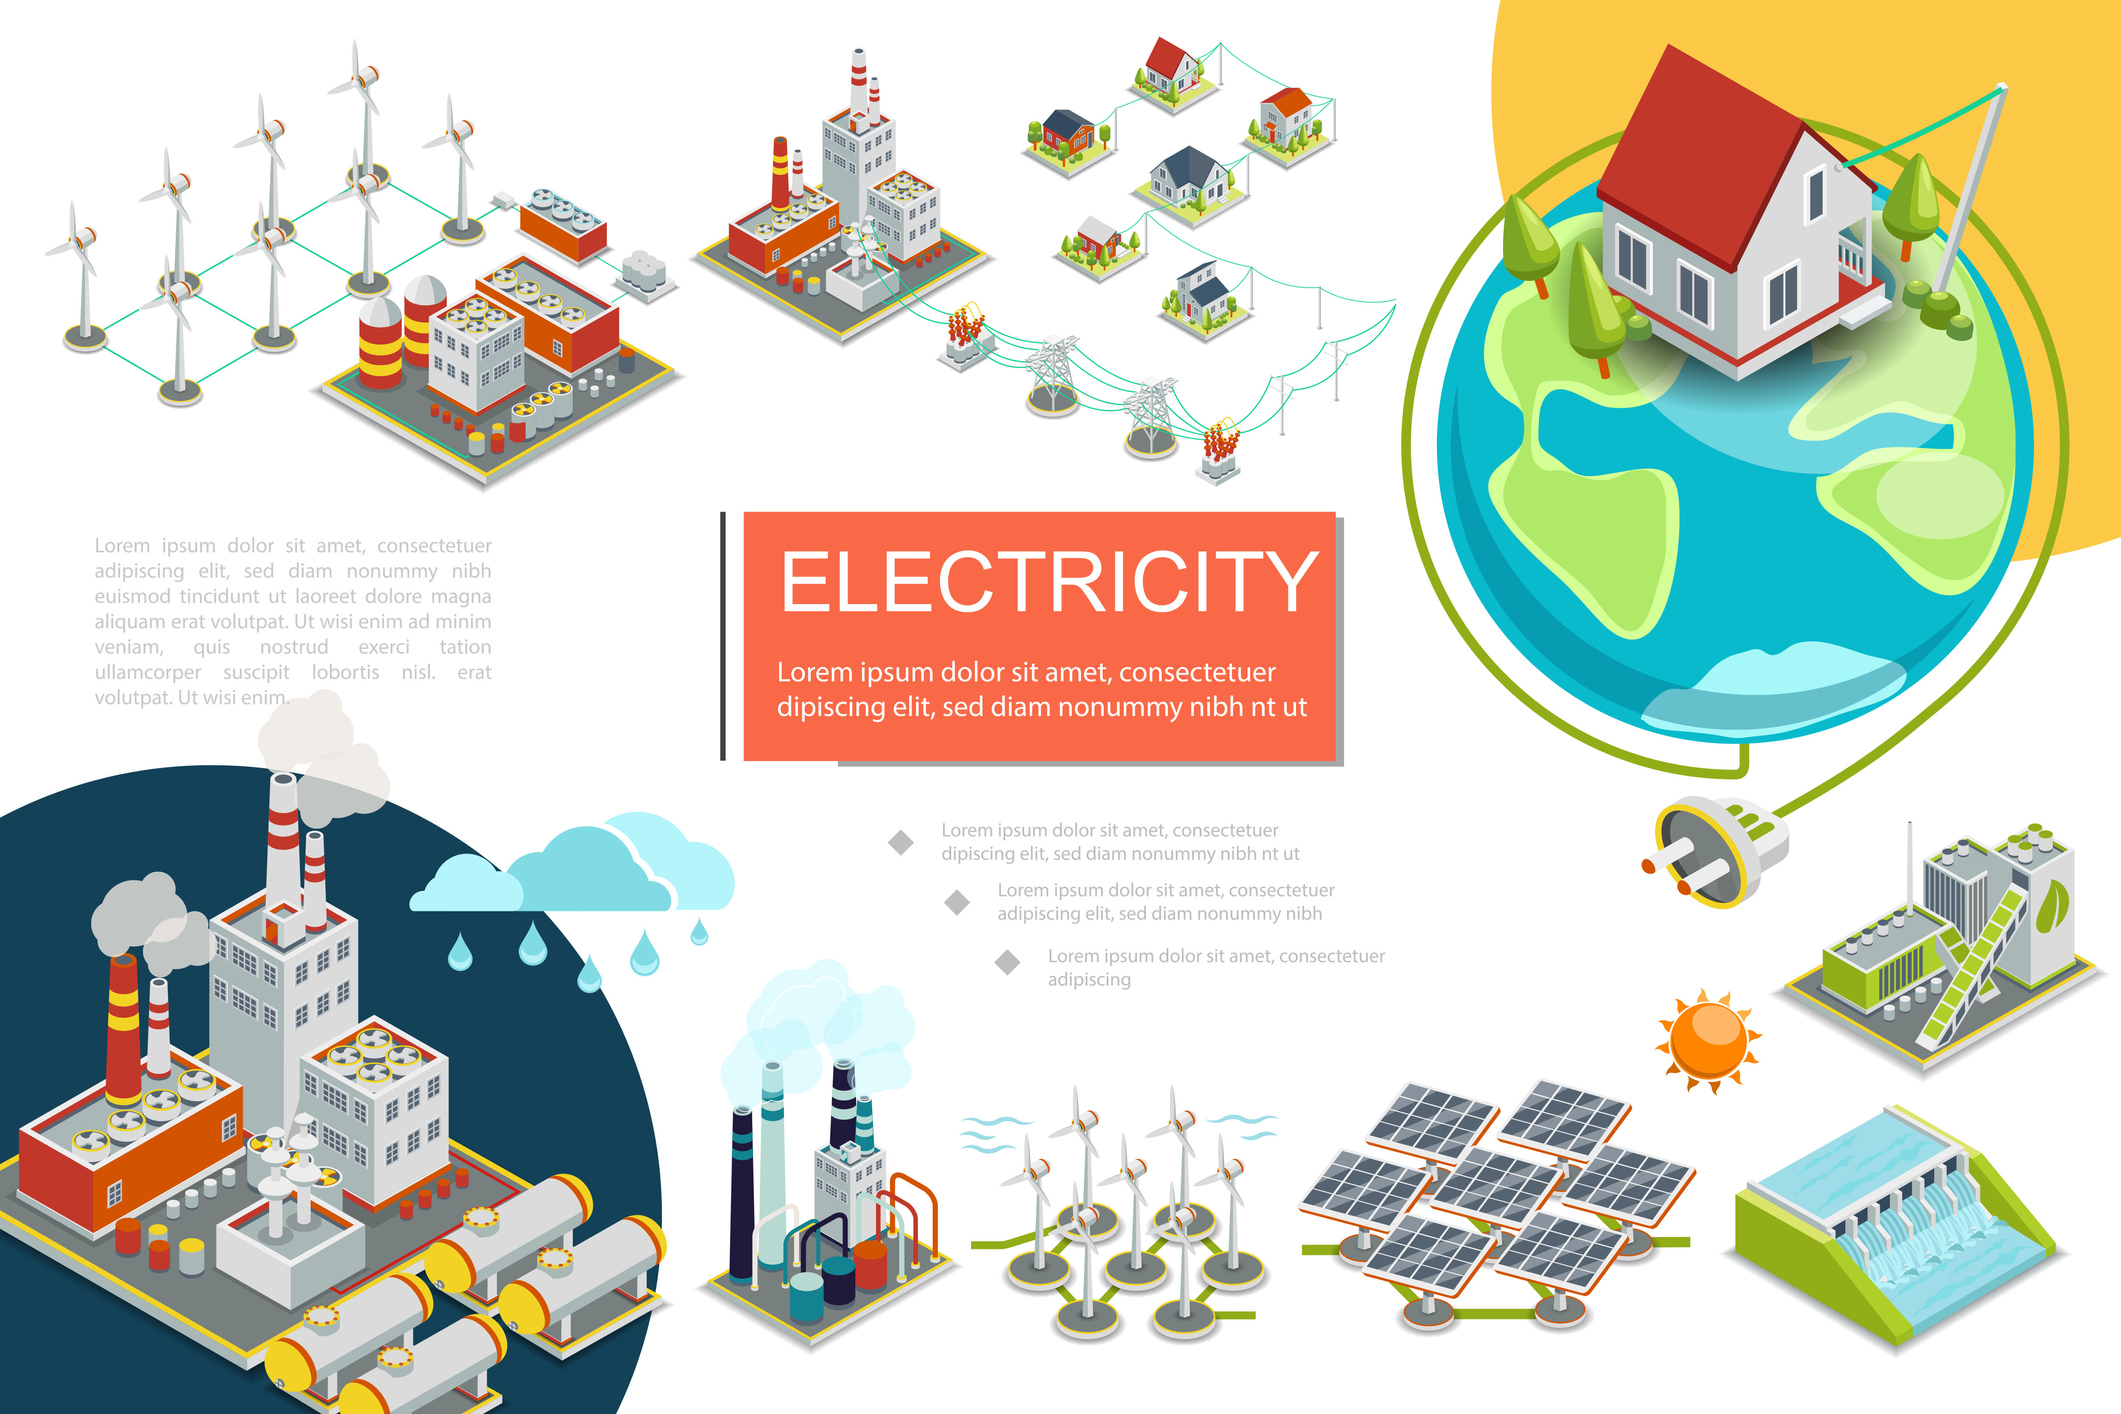 An infographic showing various sustainable energy sources in local communities